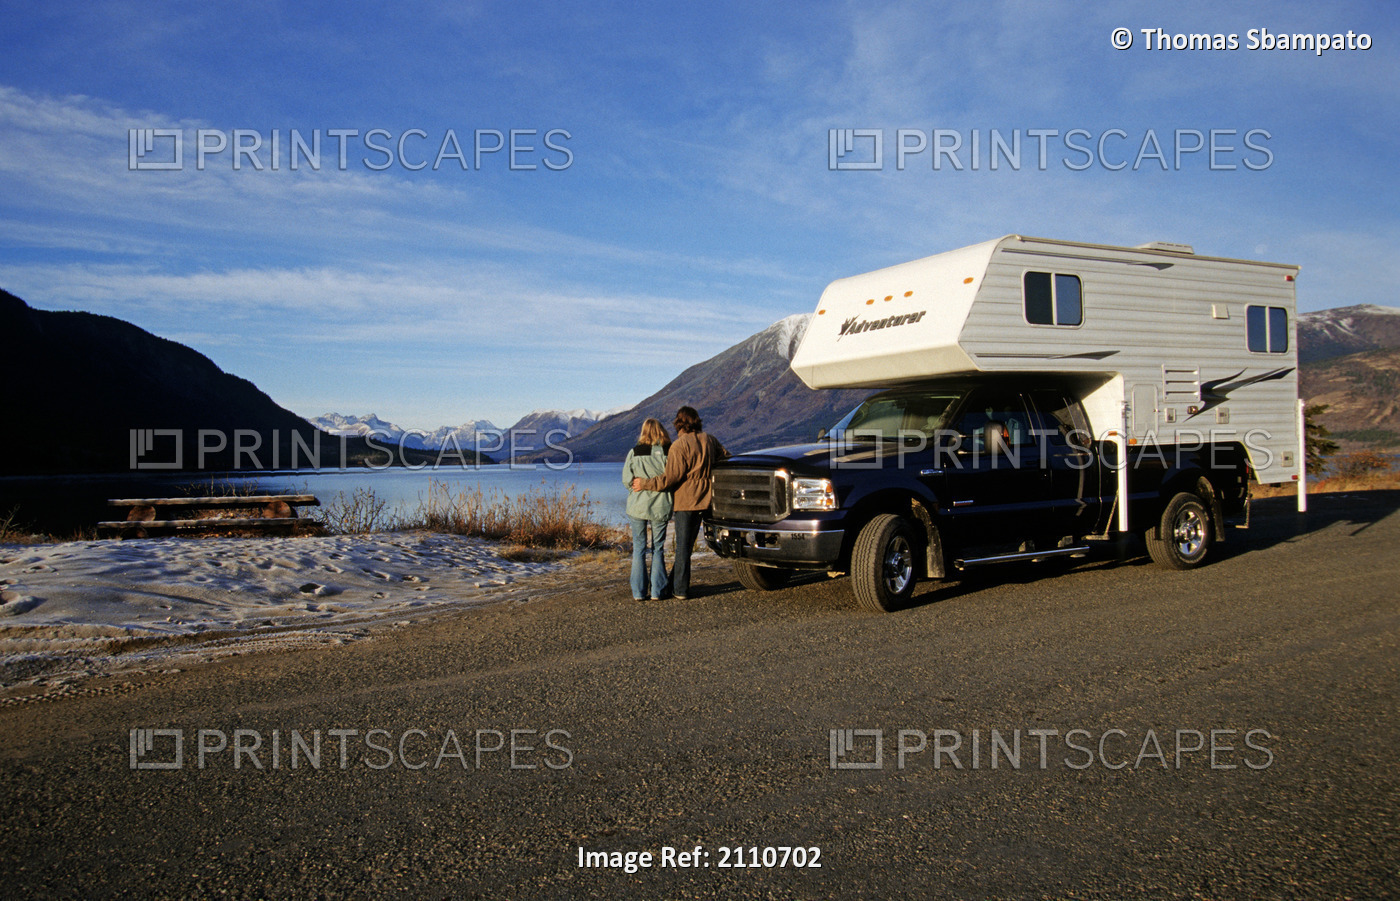 Couple Stopped Along The Alaska Highway In Canada To Enjoy The View